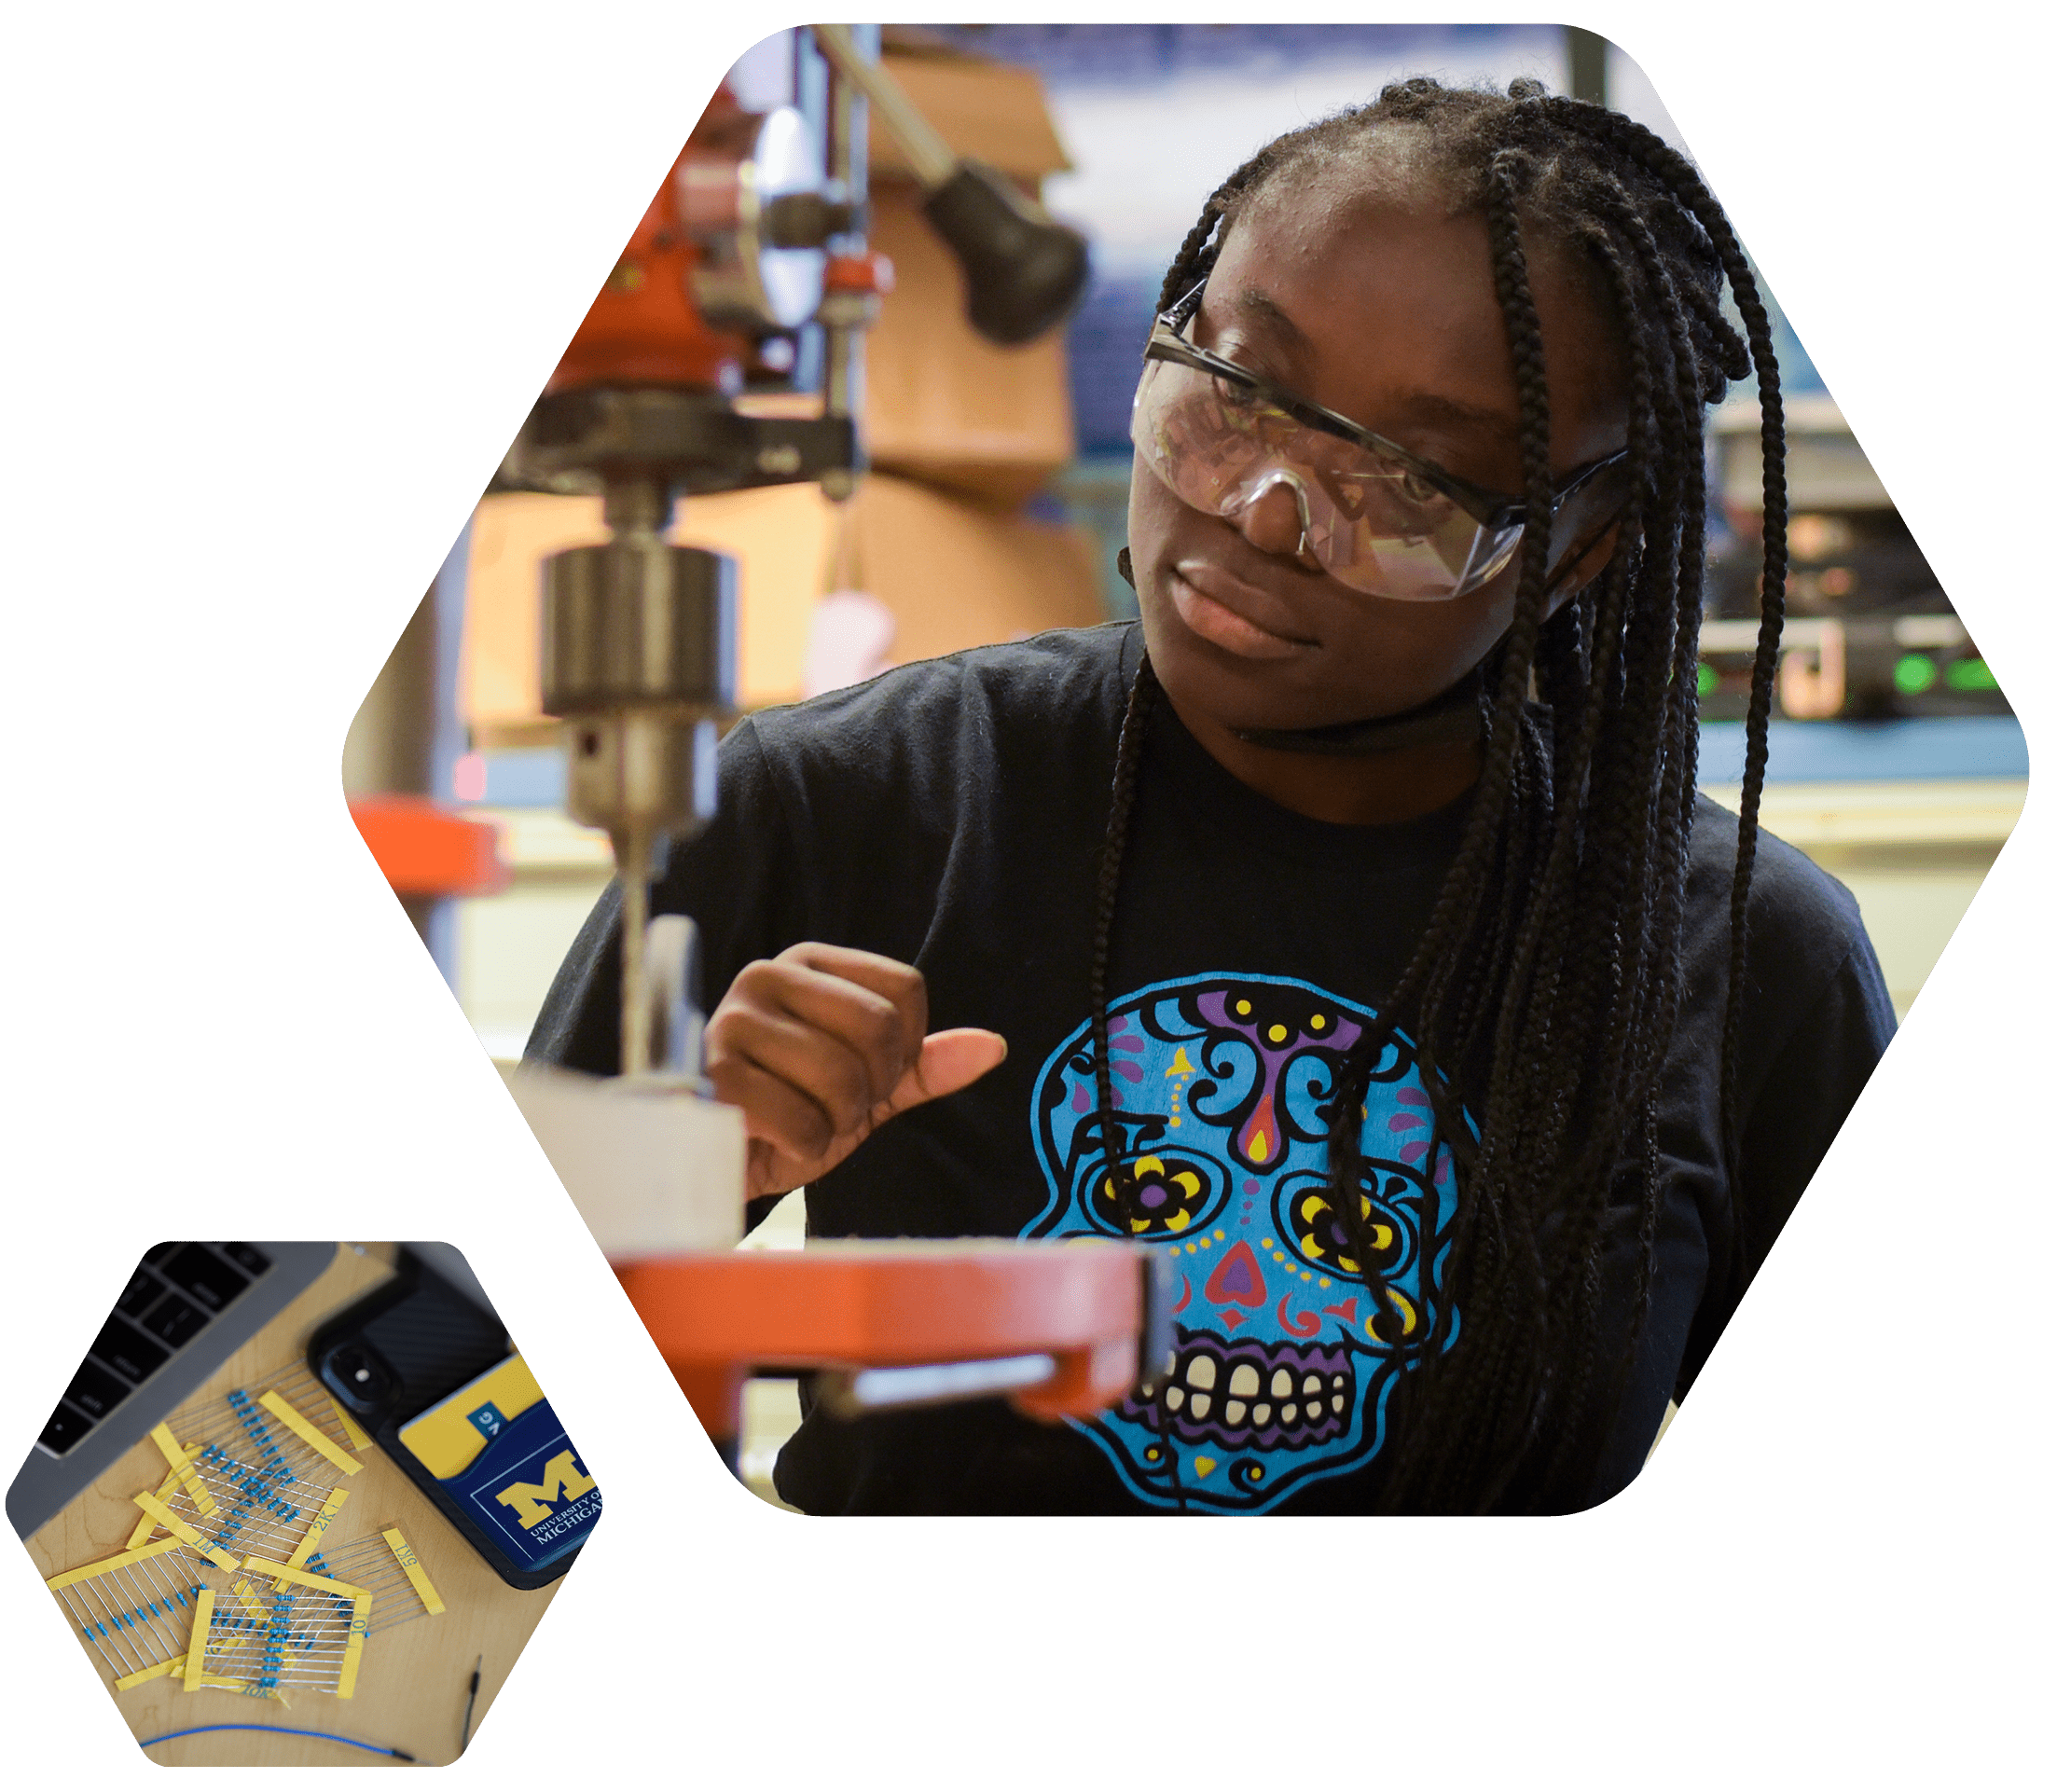 Large hexagon with student wearing goggles working with machinery in lab, smaller hexagon with maize and blue resistors on desk